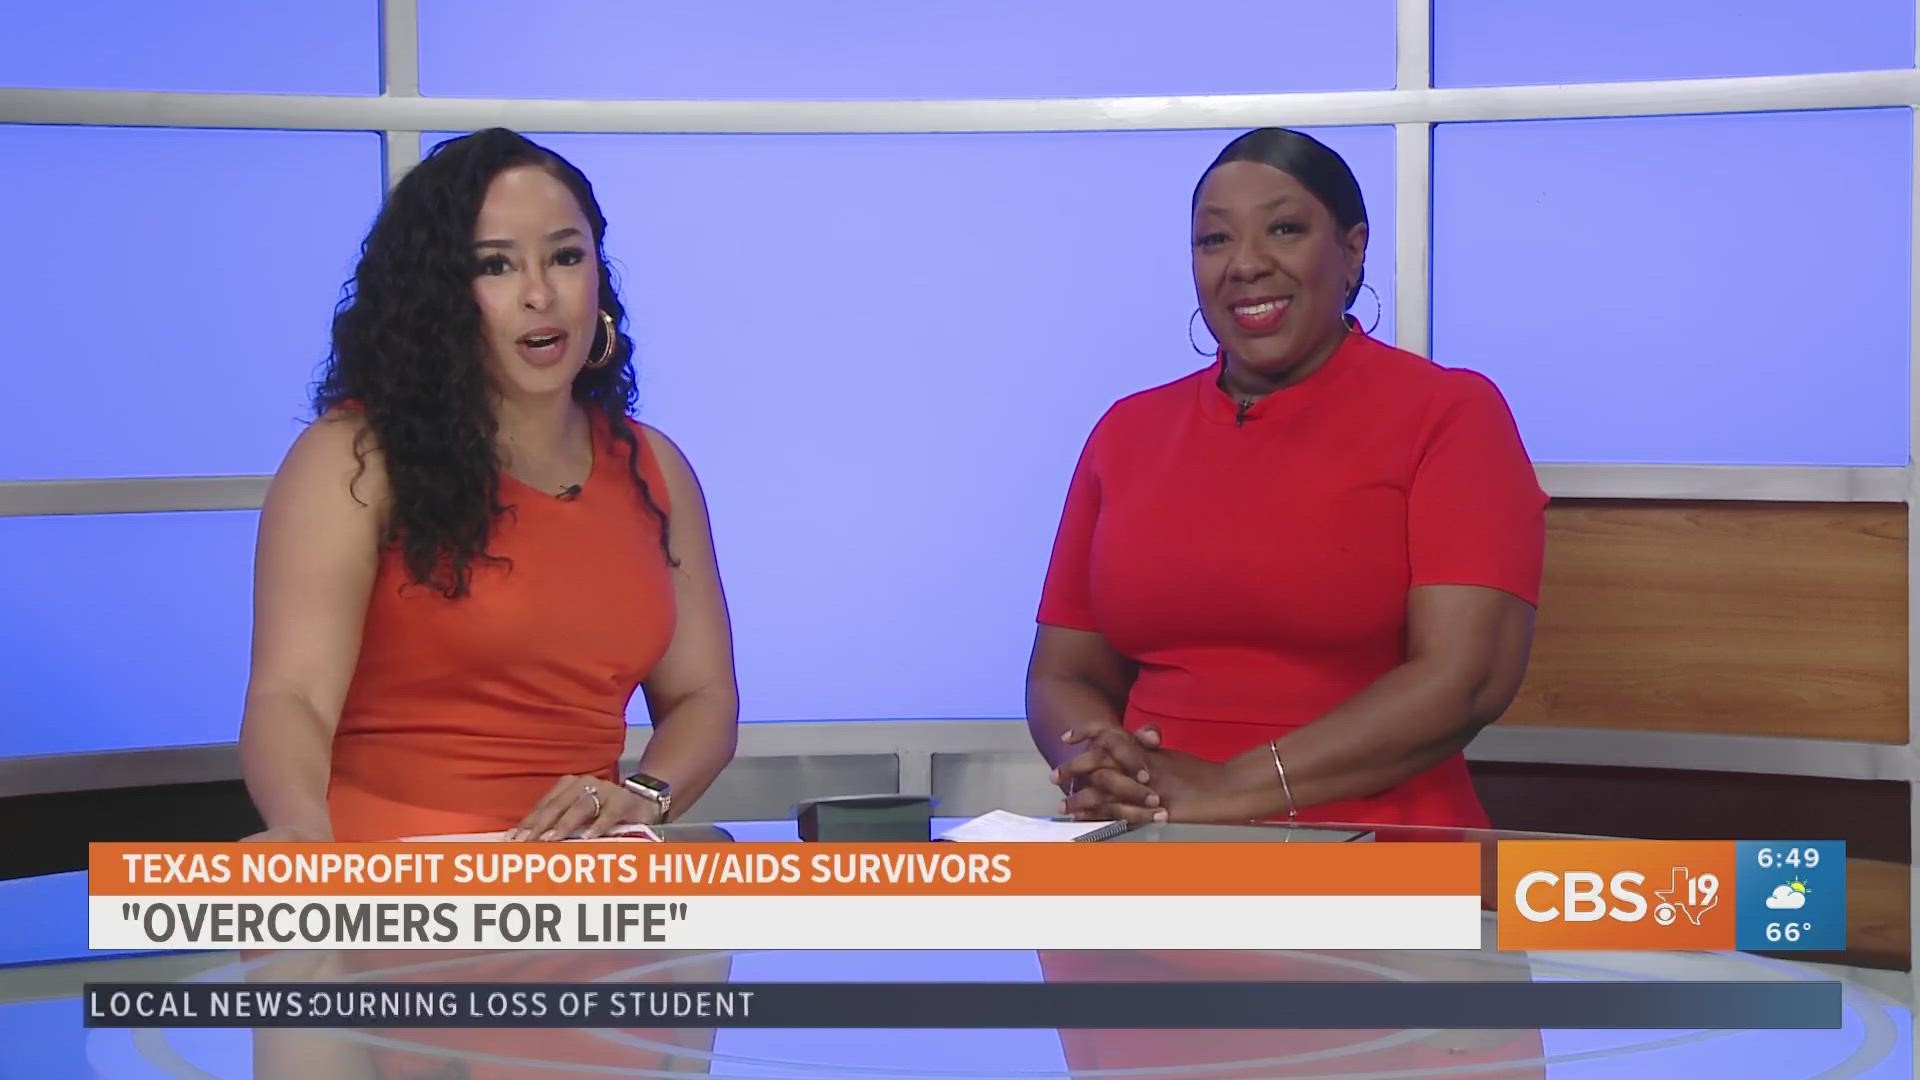 East Texas native shares of her story of surviving with HIV, discusses new nonprofit